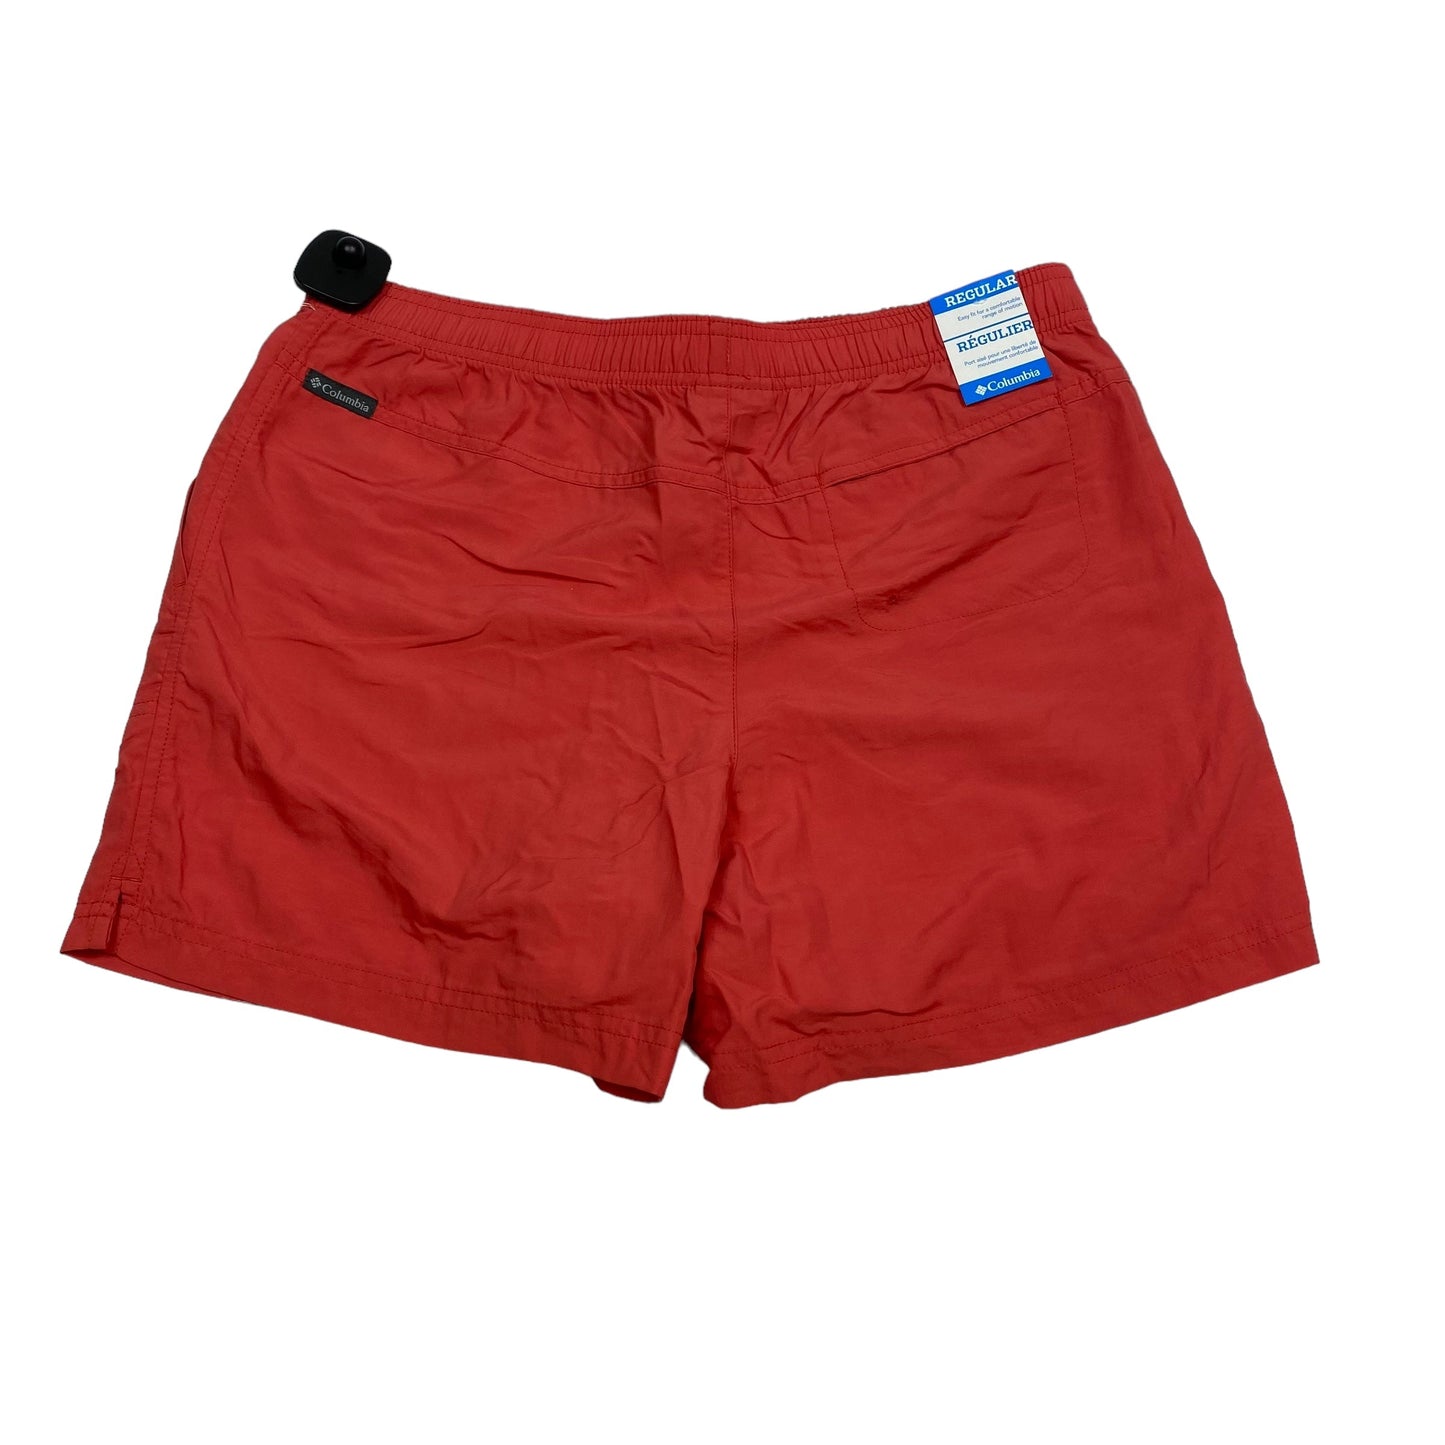 Red Athletic Shorts Columbia, Size M